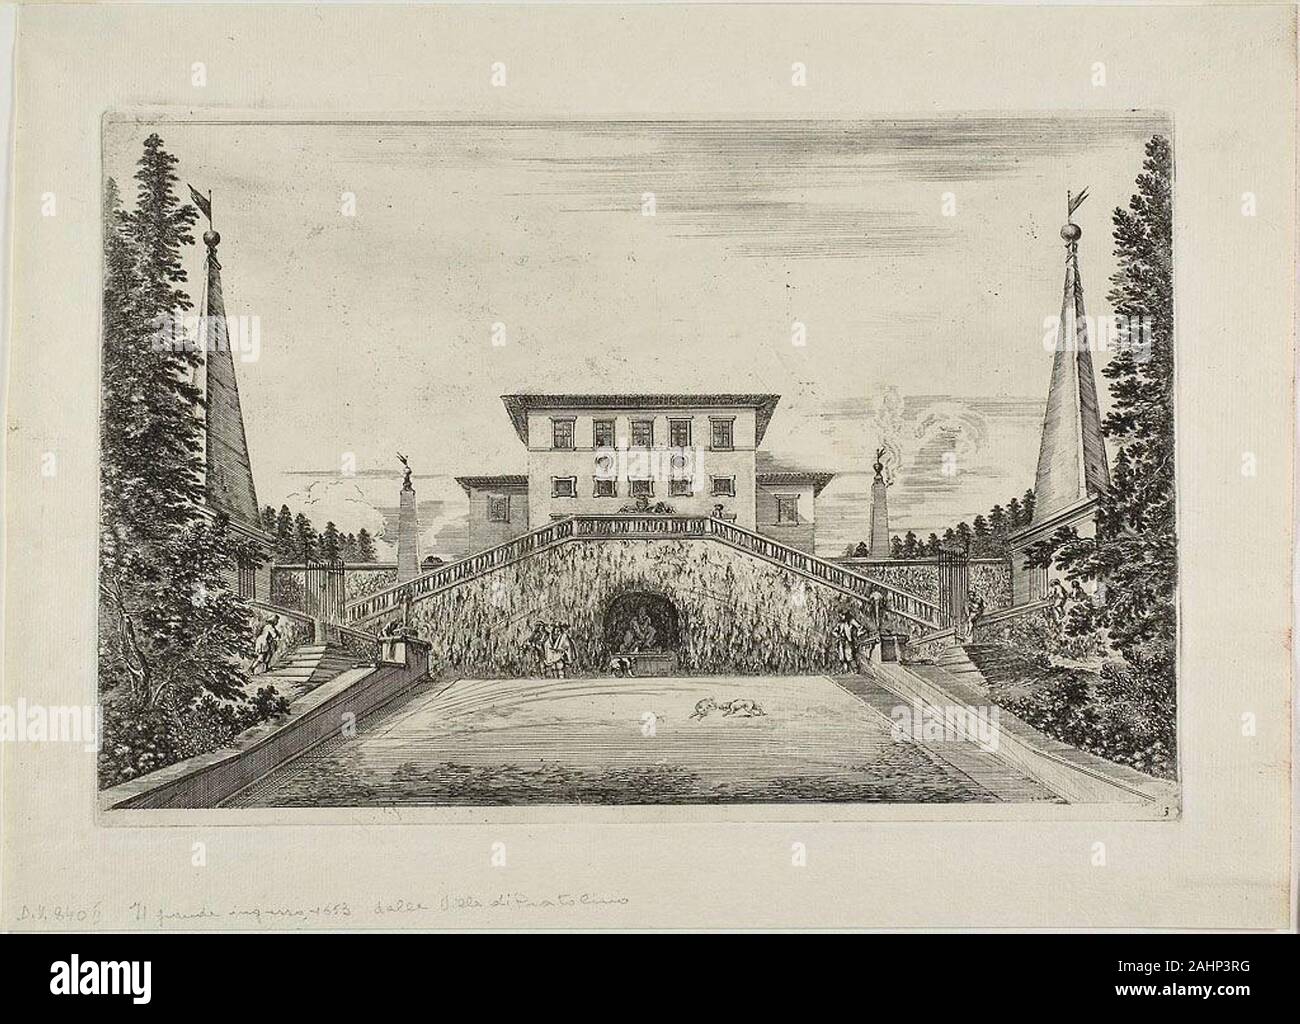 Stefano della Bella. South Facade of the Villa and the Great Meadow, from Views of the Villa Pratolino. 1653–1655. Italy. Etching on cream laid paper This view is from a set of six signed and numbered etchings of the Villa Pratolino in Florence and its famous park, fountains, and grottoes. The villa, which was destroyed in 1822, was created around 1569-84 for Grand Duke Francesco I de’ Medici based on the designs of Bernardo Buontalenti and others. This set of plates was so popular that it continued to be printed into the 18th century. Stock Photo